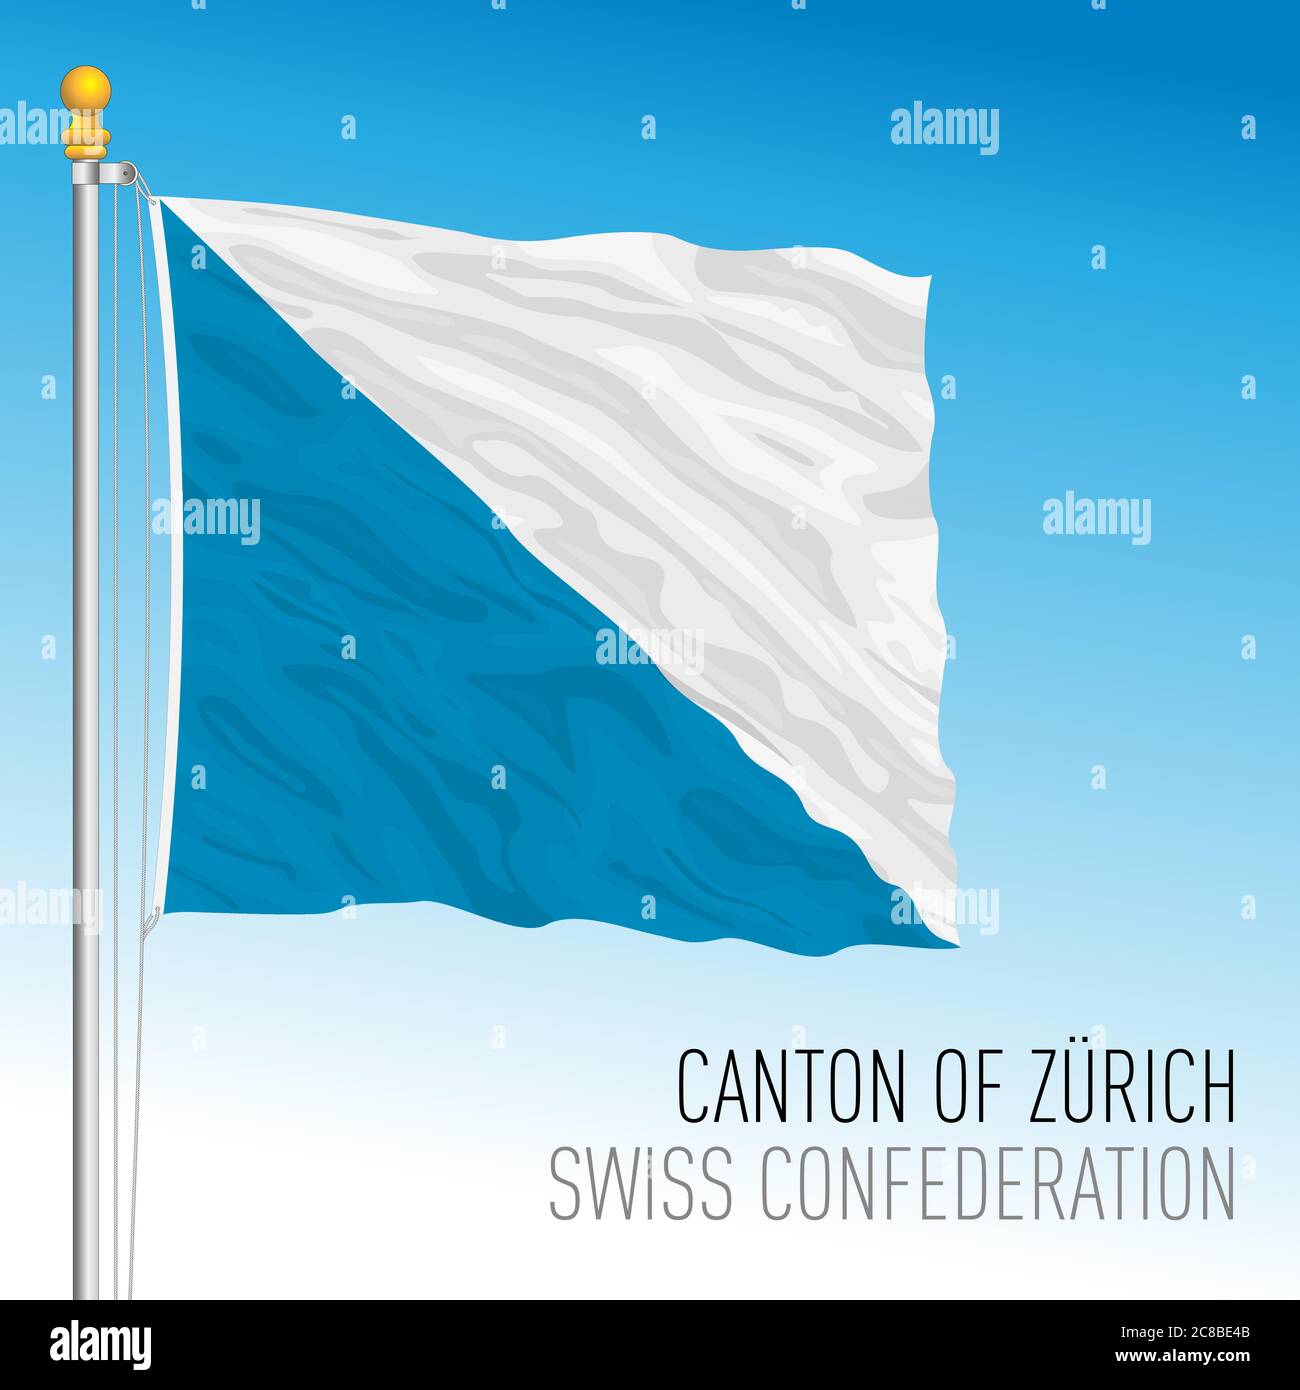 Canton of Zurich, official flag, Switzerland, european country, vector illustration Stock Vector